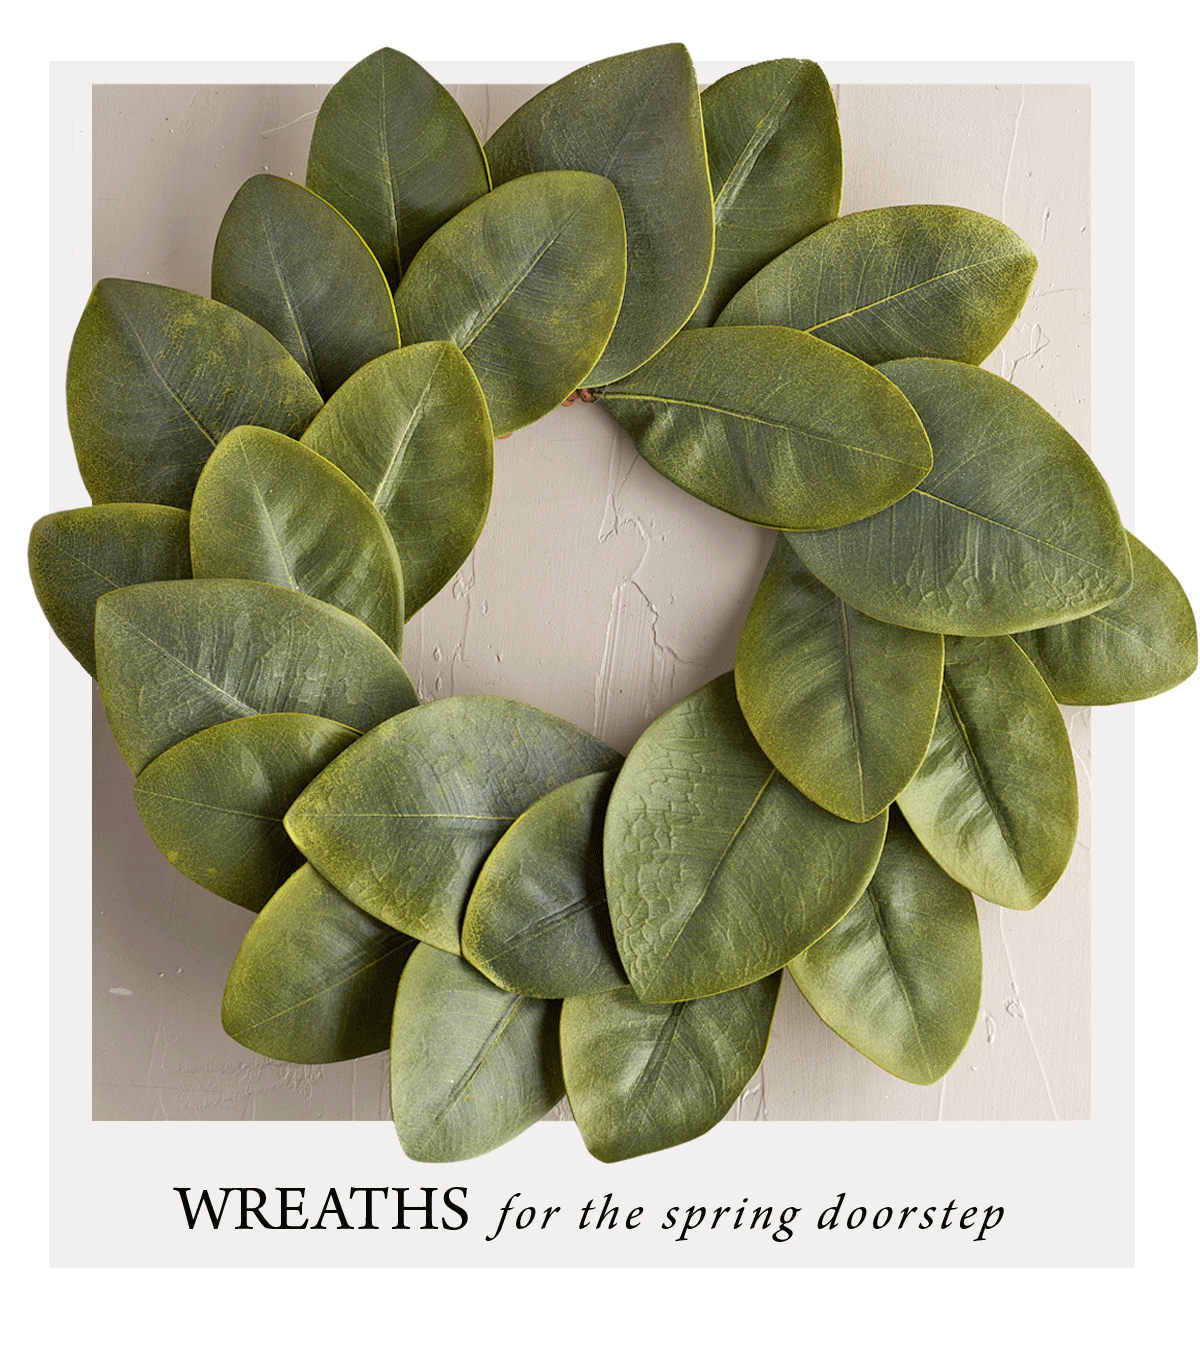 WREATHS for the spring doorstep